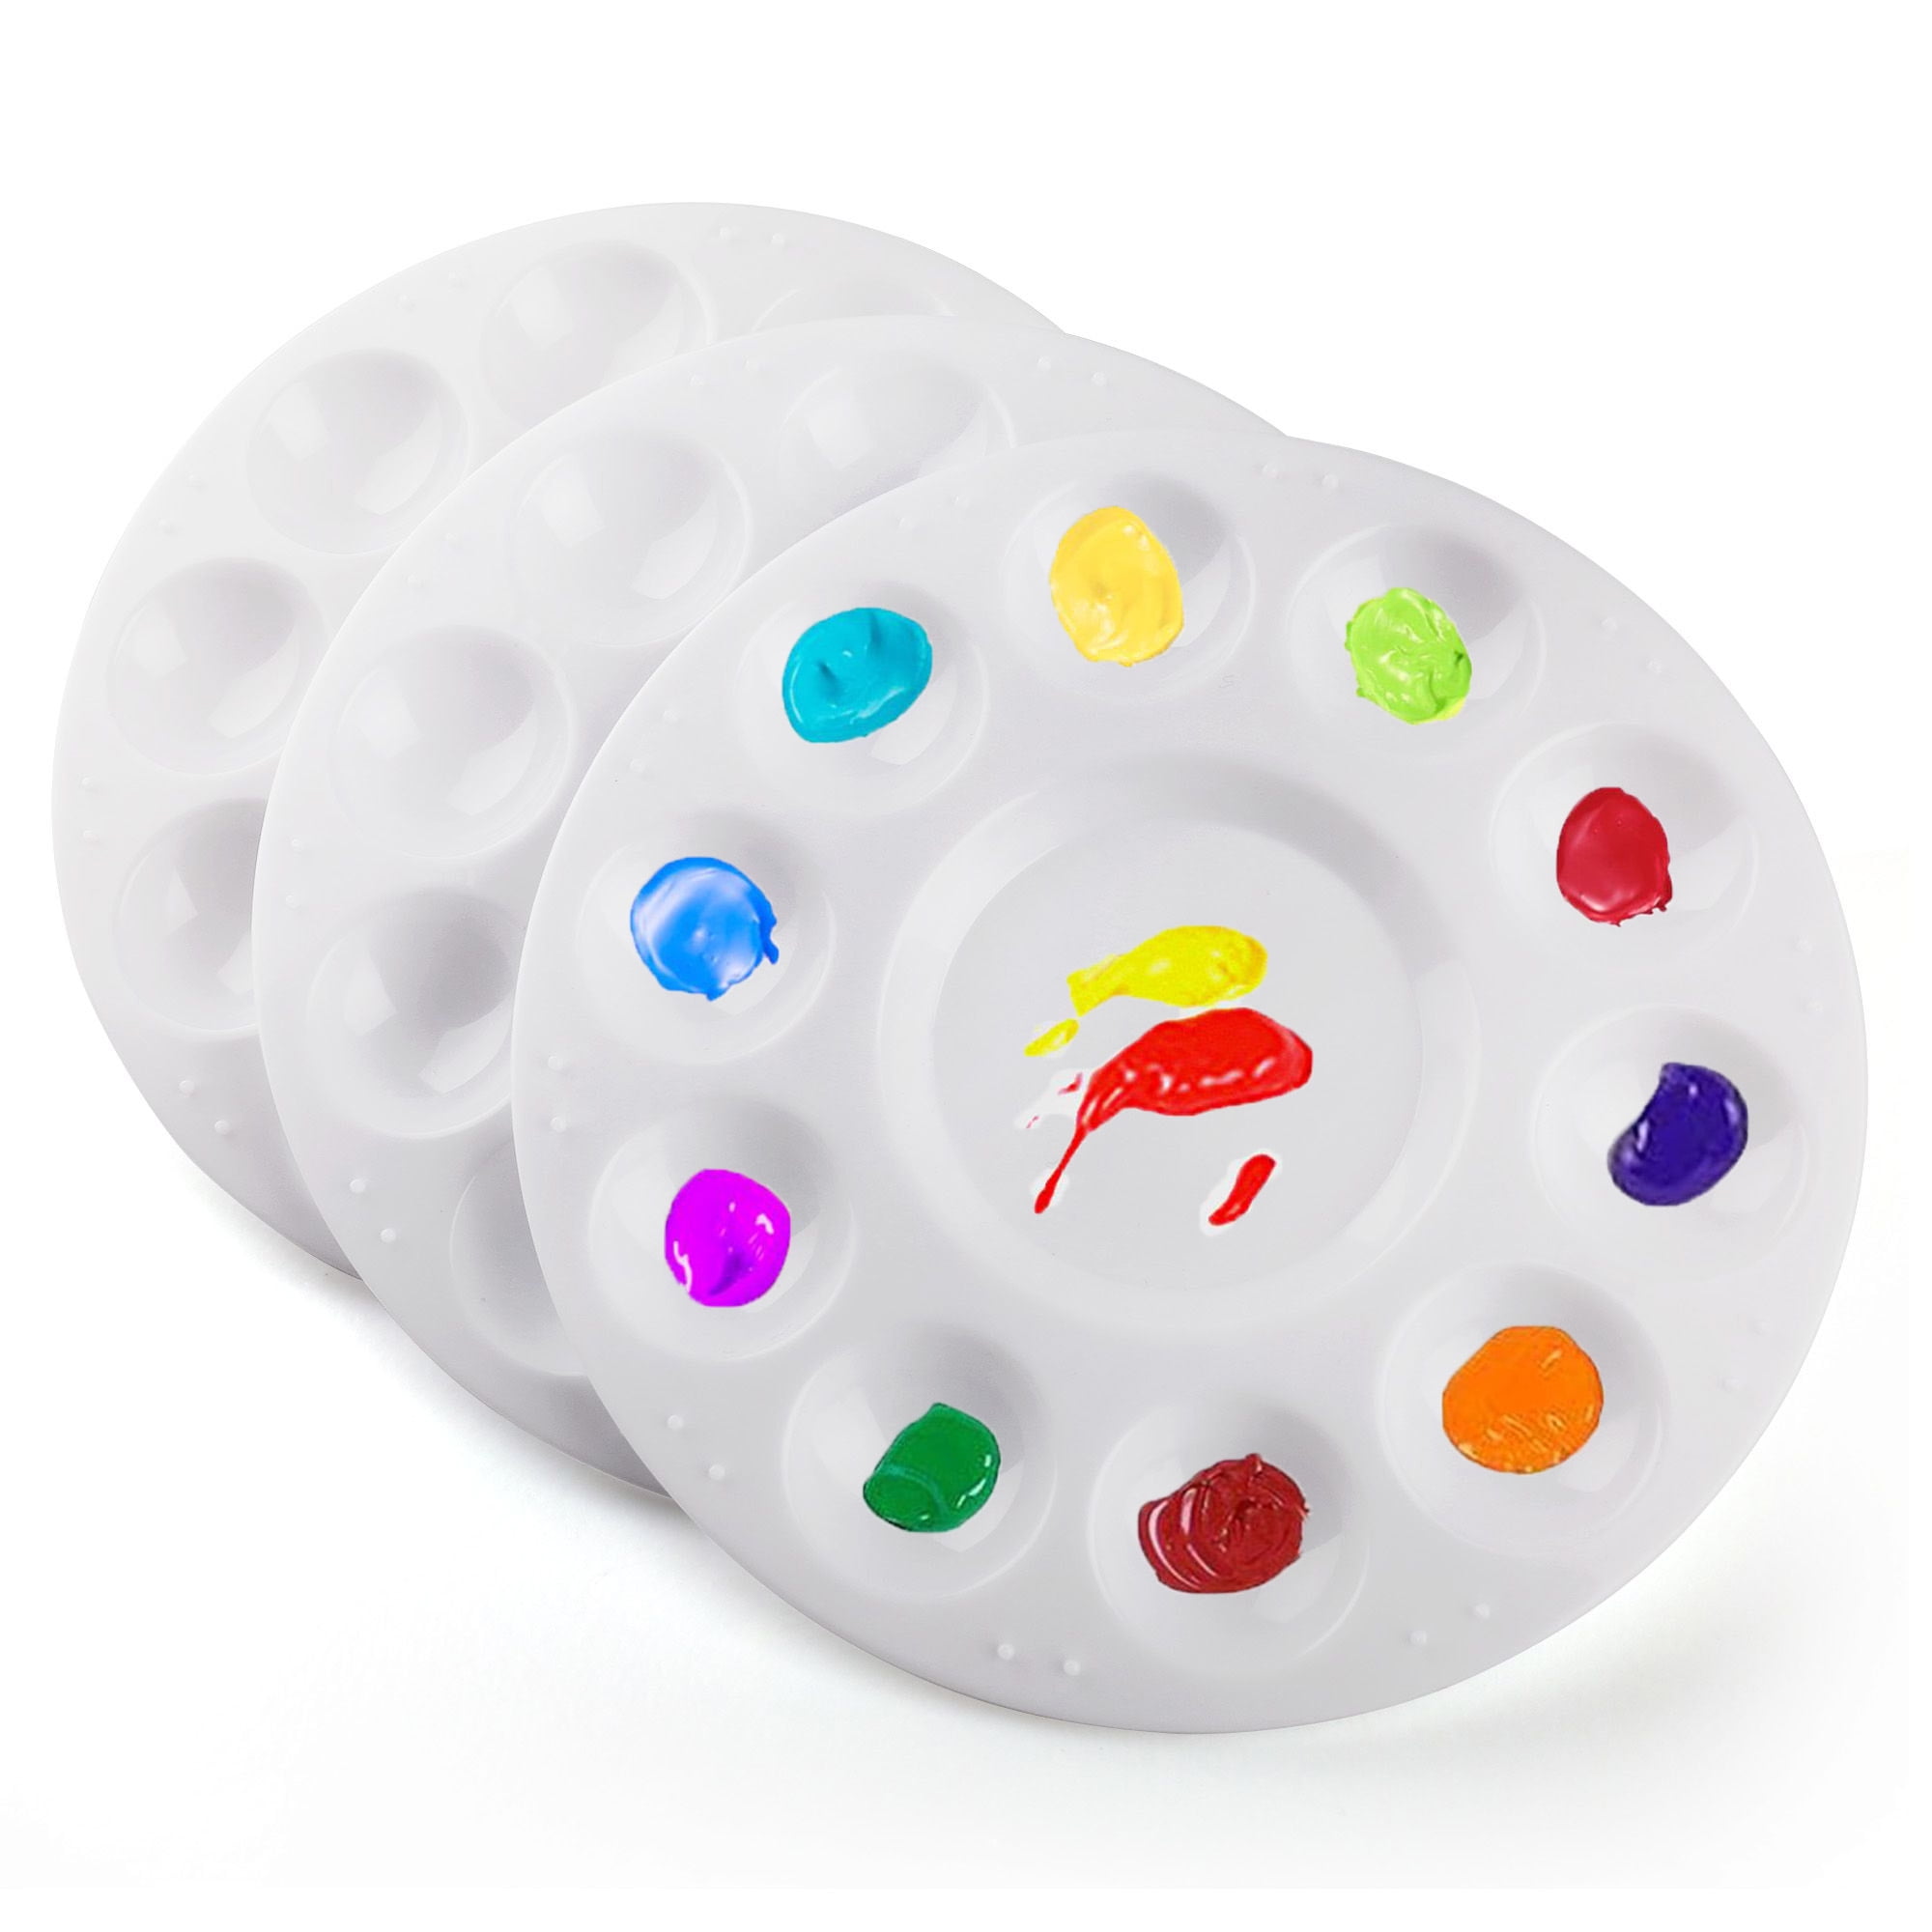 NEW PAINT PALETTE PALLET COLOUR MIXING 10 WELL PLASTIC ARTIST CHILDRENS ROUND 